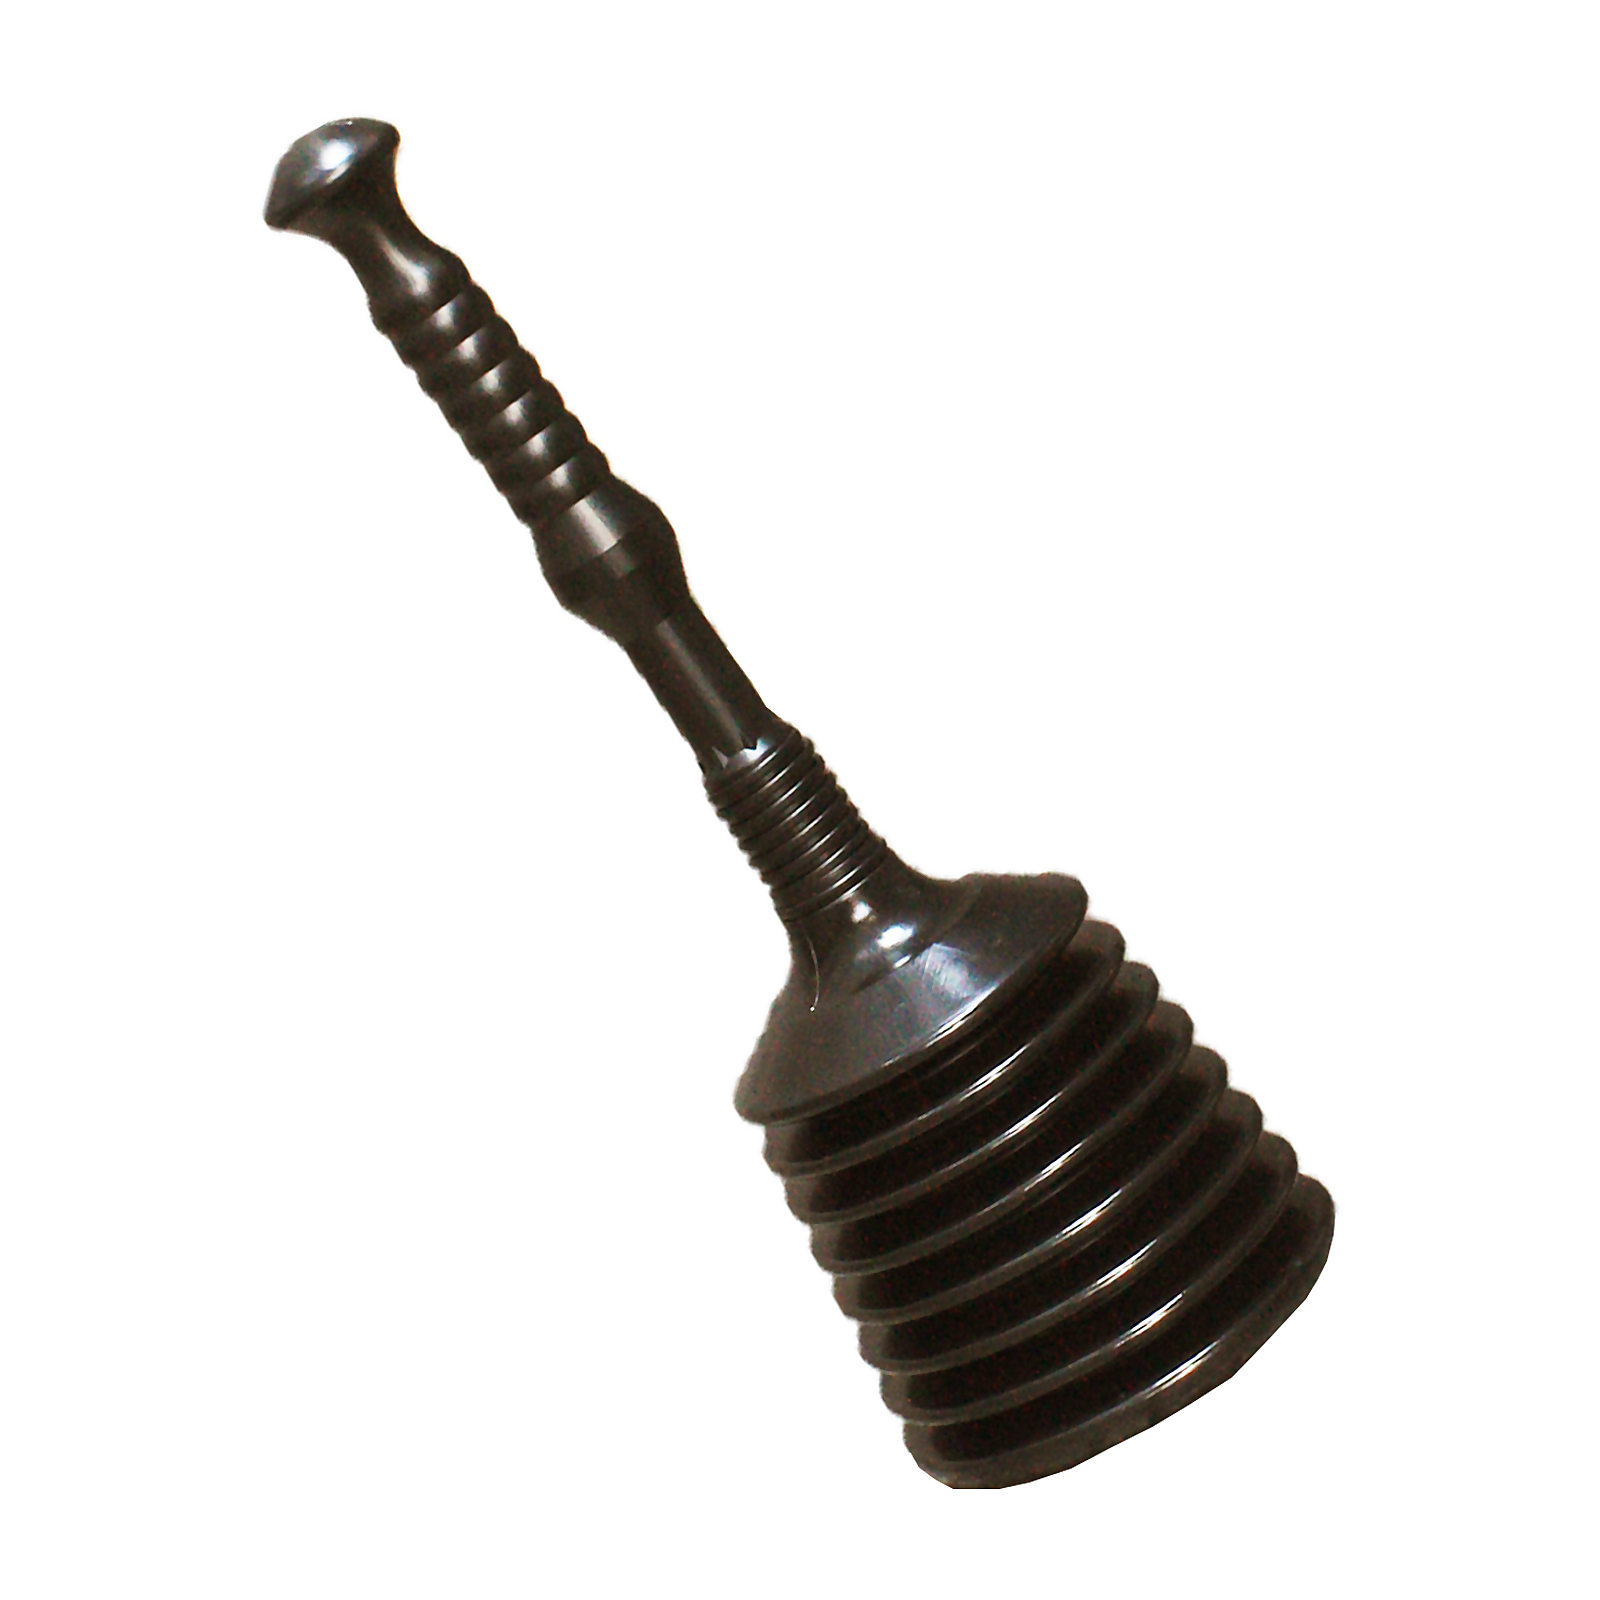 Master Plunger with Powerful Suction